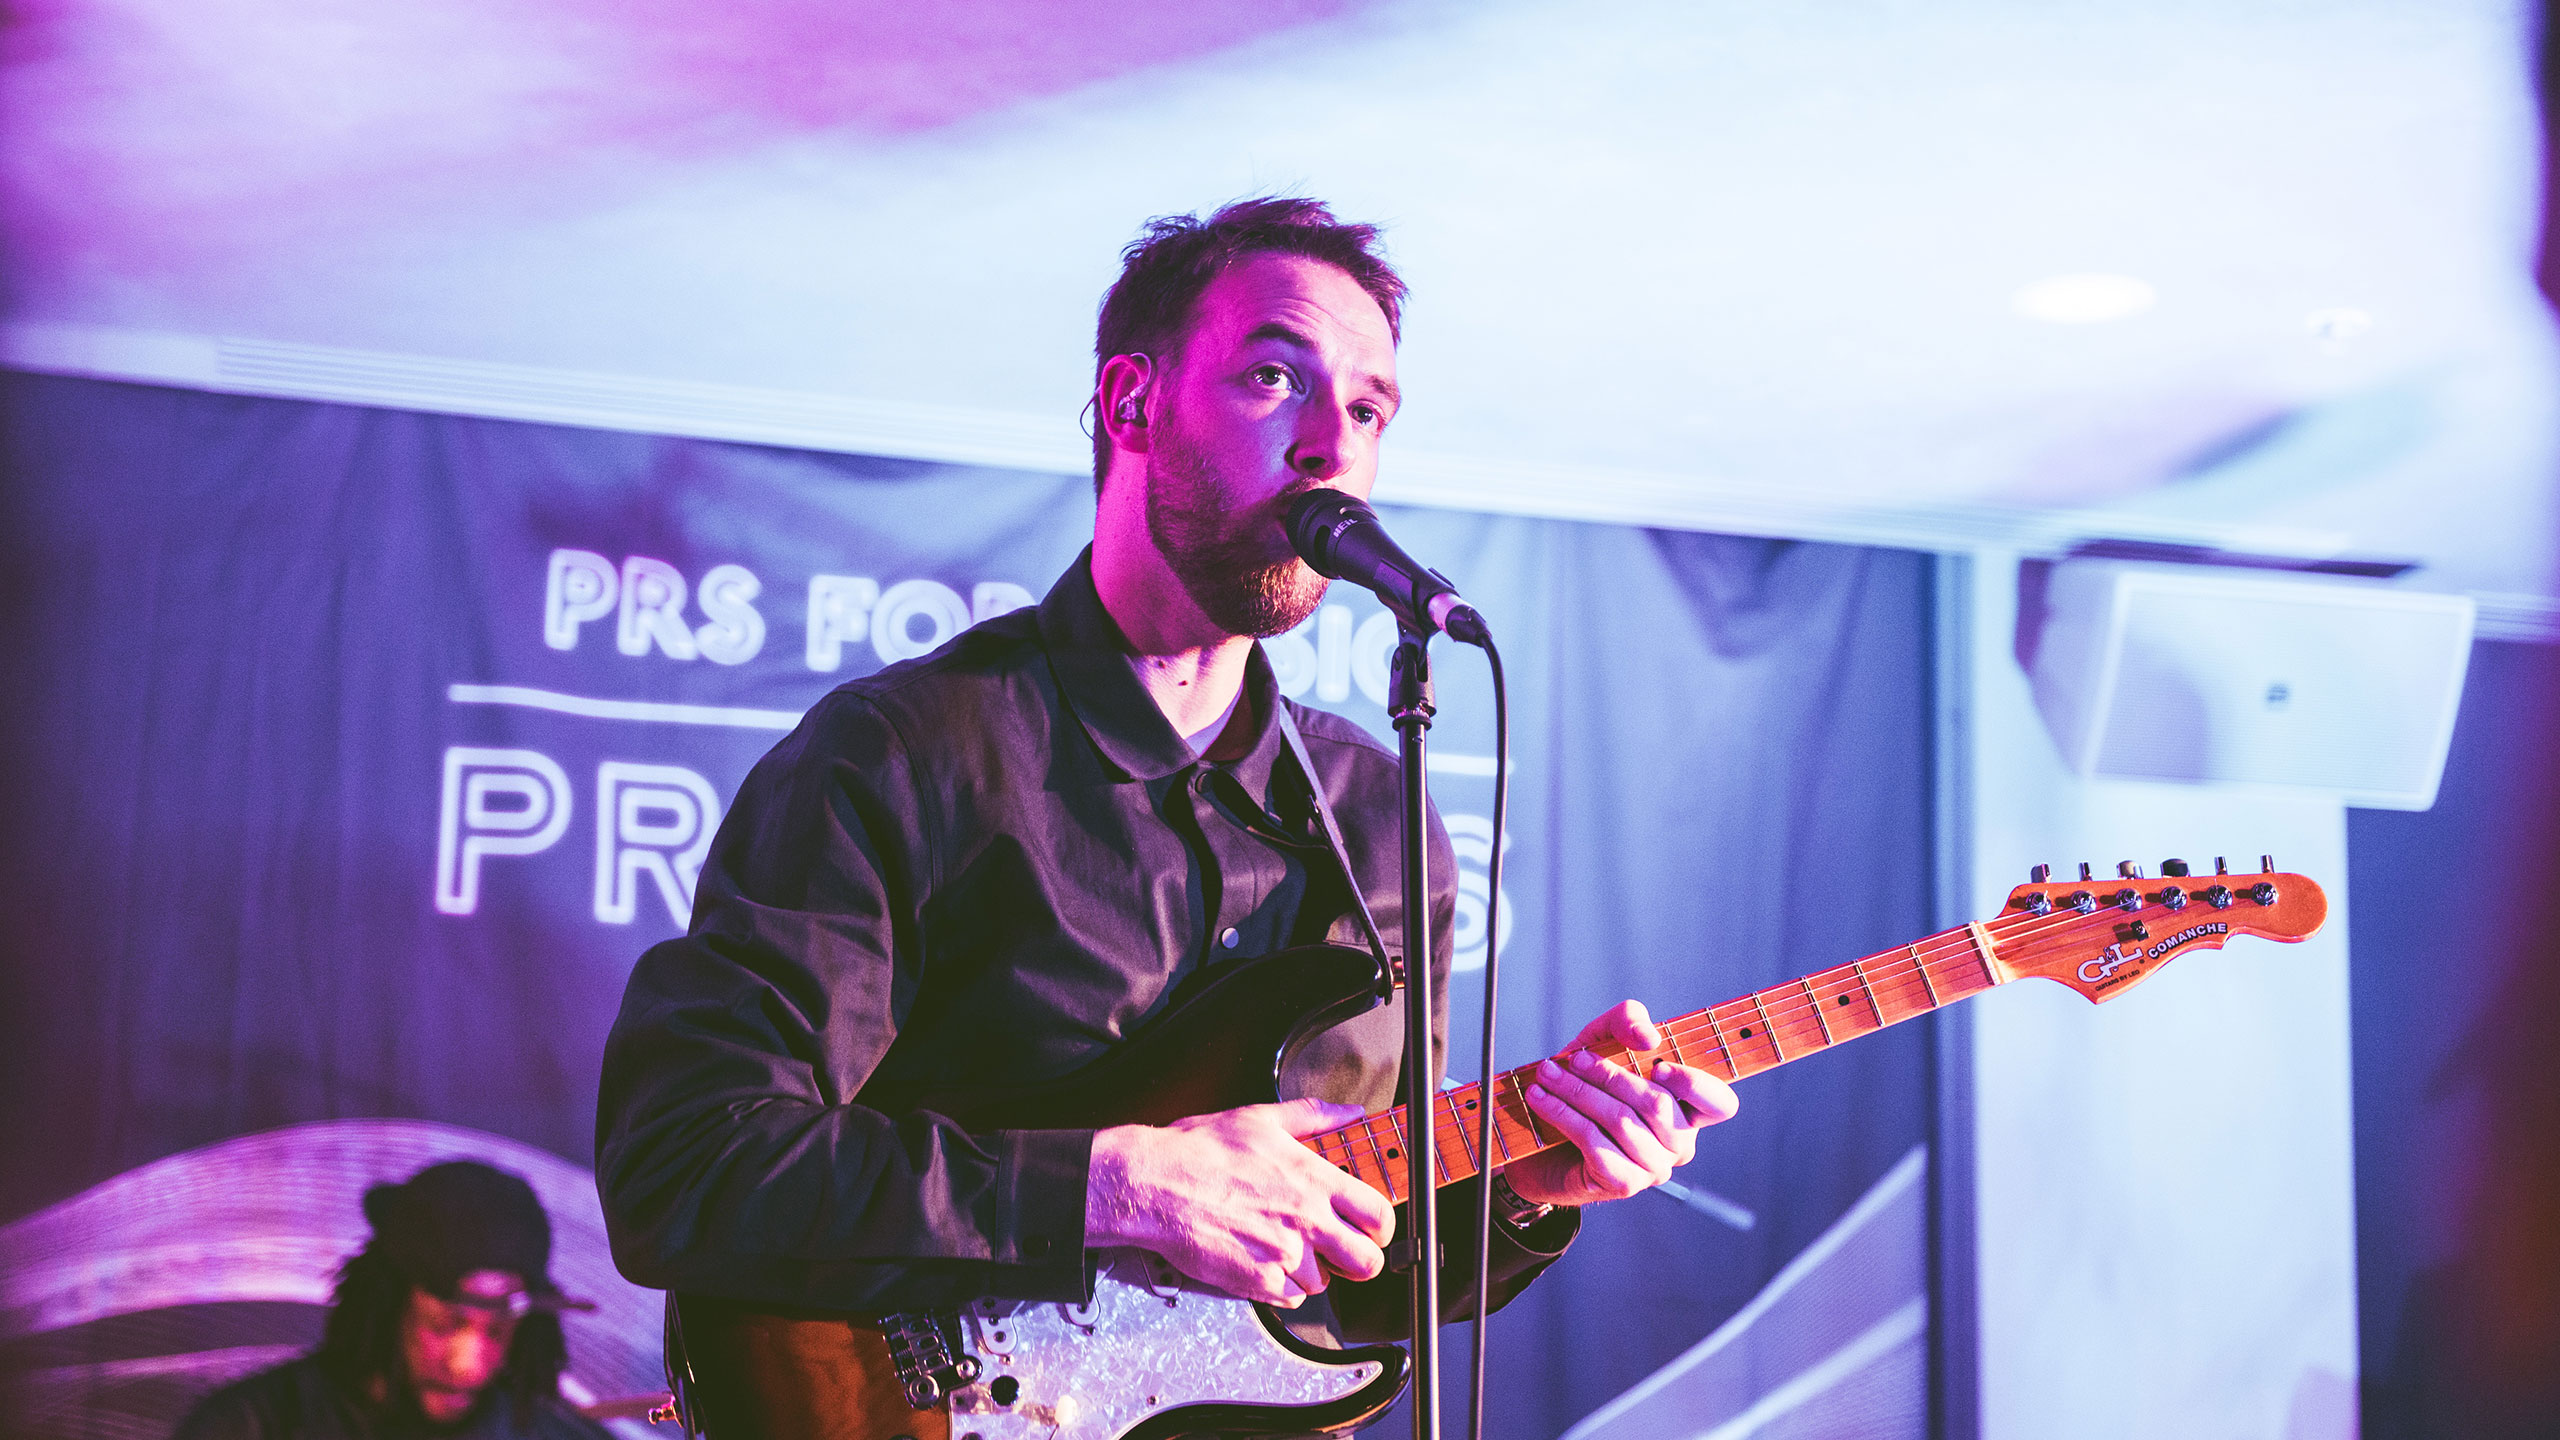 Honne's Andy Clutterbuck plays guitar and sings at PRS Presents, wearing a dark shirt